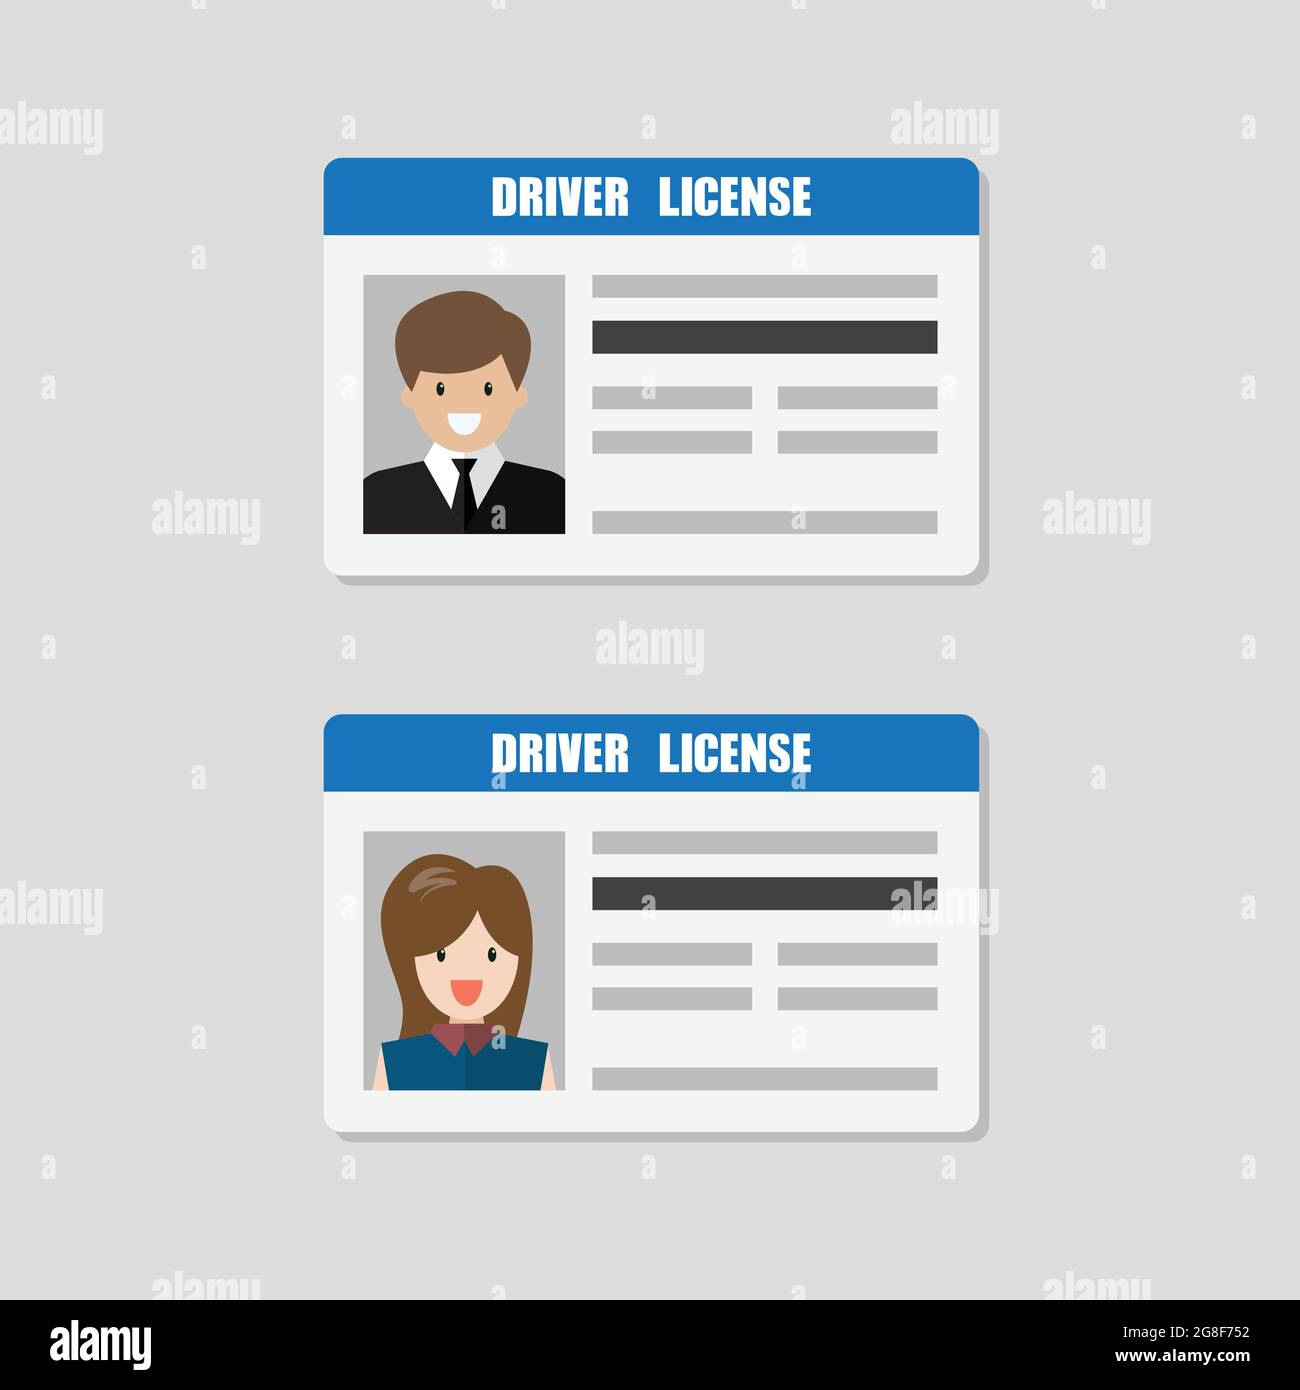 Driver License With Male and Female Photo Vector Illustration. Flat style Personal Identity Stock Vector